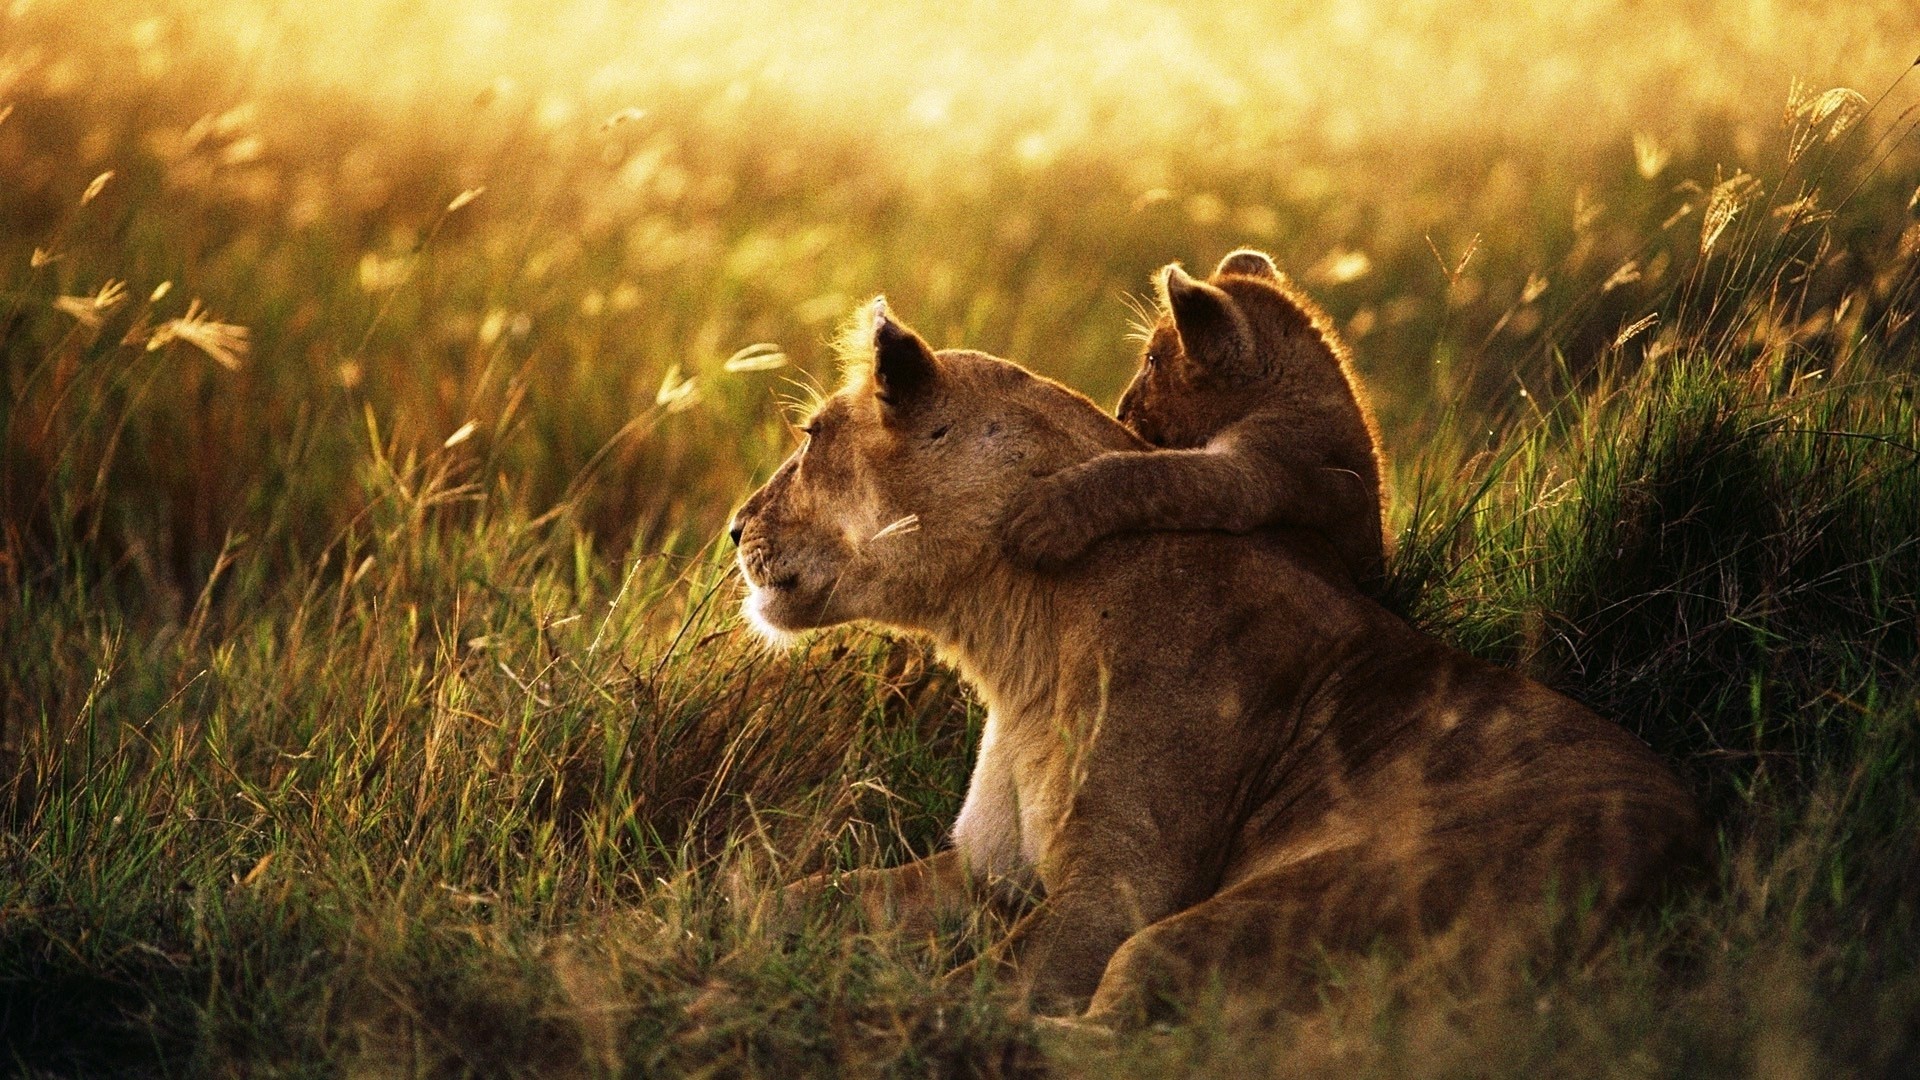 Lioness and her bebe